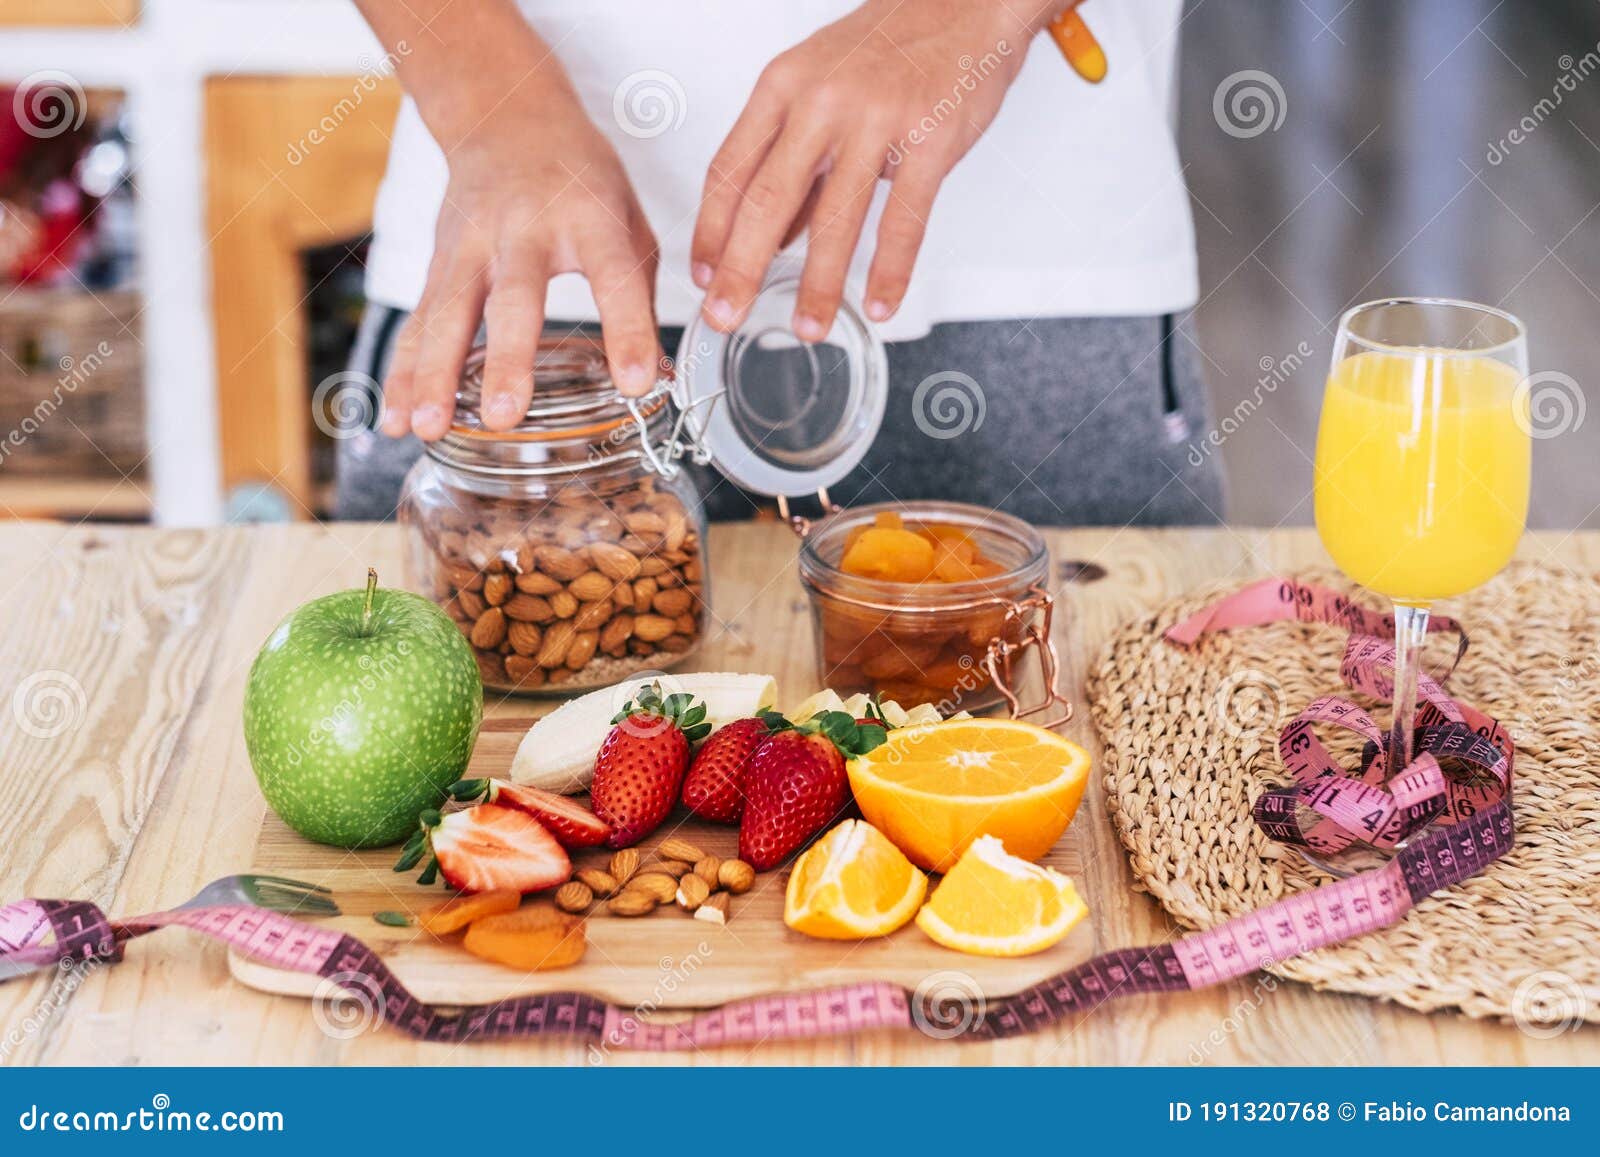 man at home touching and eating fruits - indoor and sane lifestyle concept